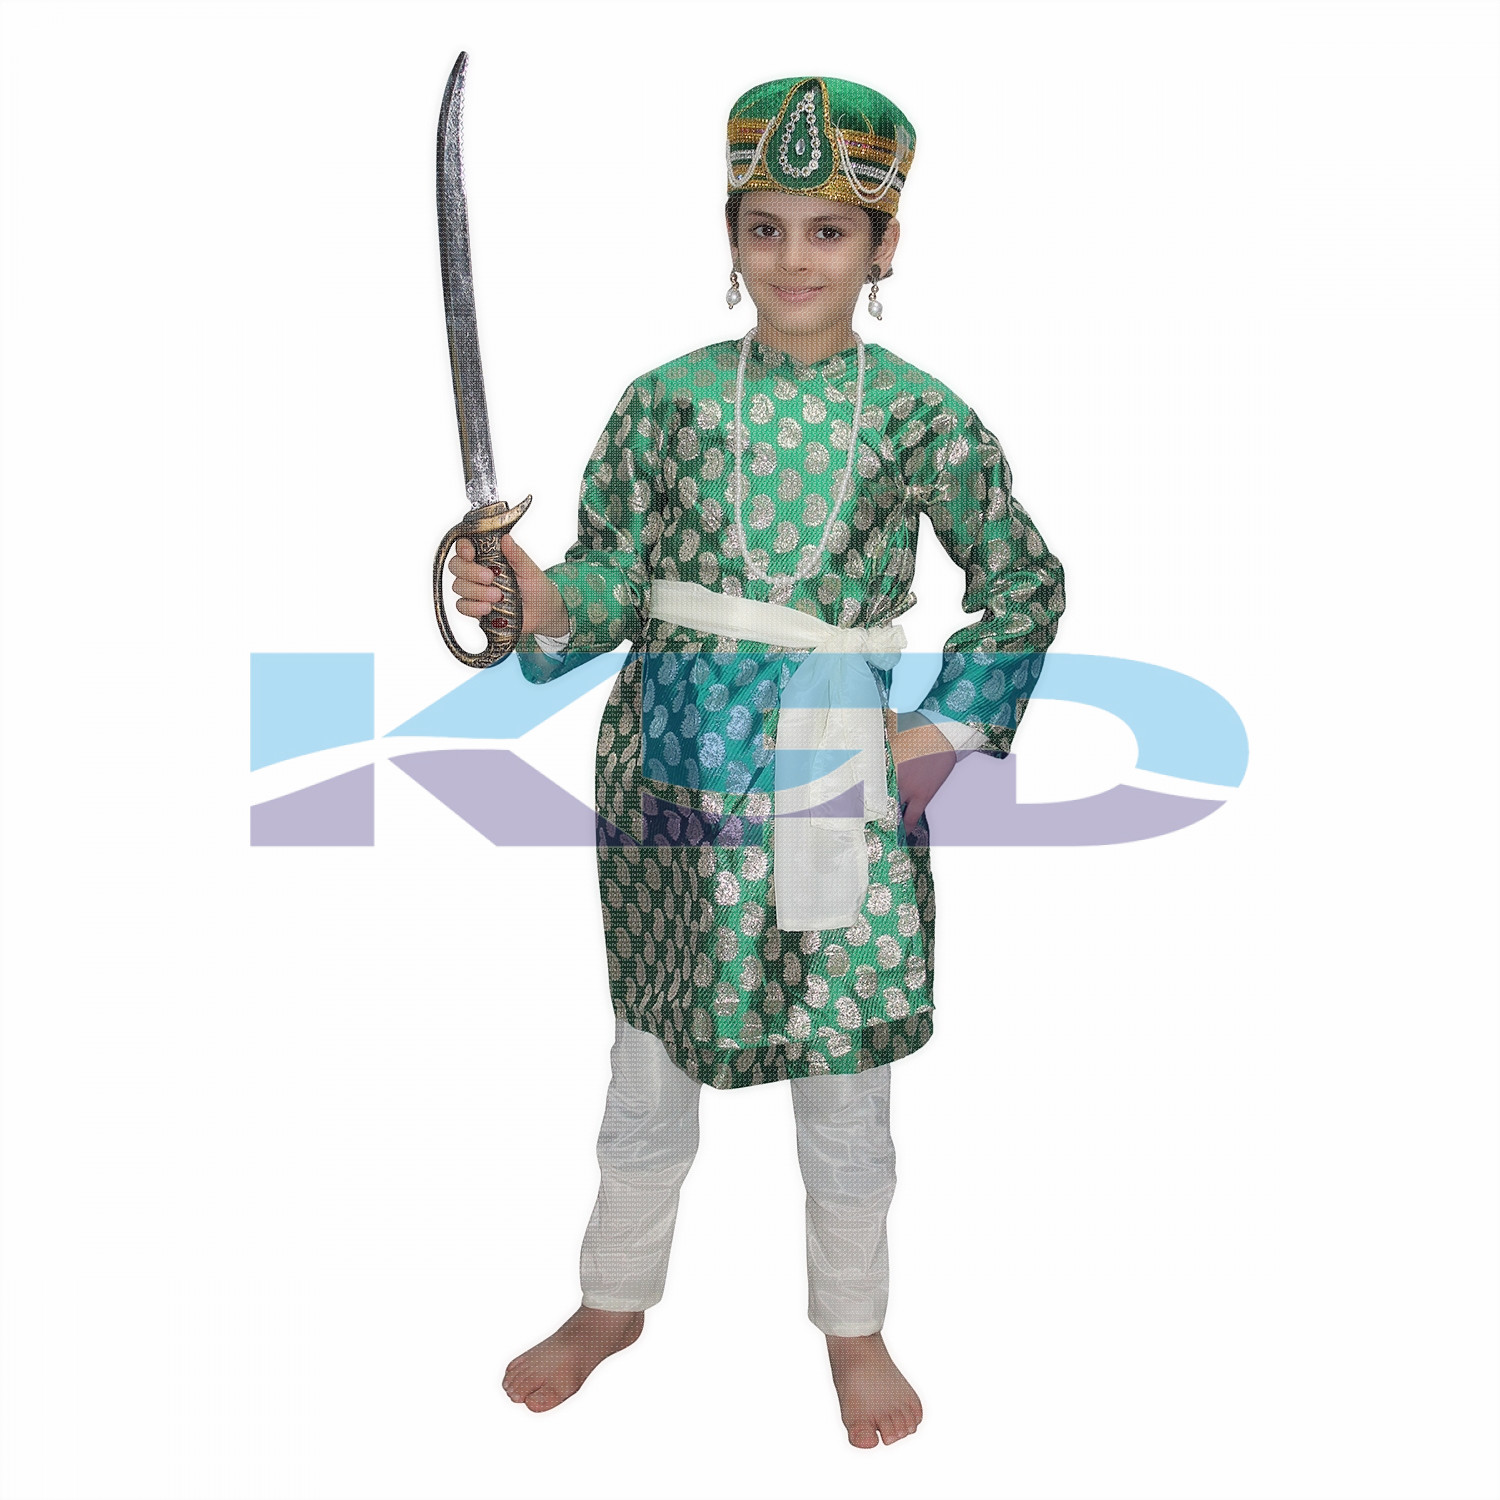 Akbar Green The Great Mughal King Costume For Kids,Costume of Indian Historical Character For School Annual function/Theme Party/Stage Shows/Competition/Birthday Party Dress